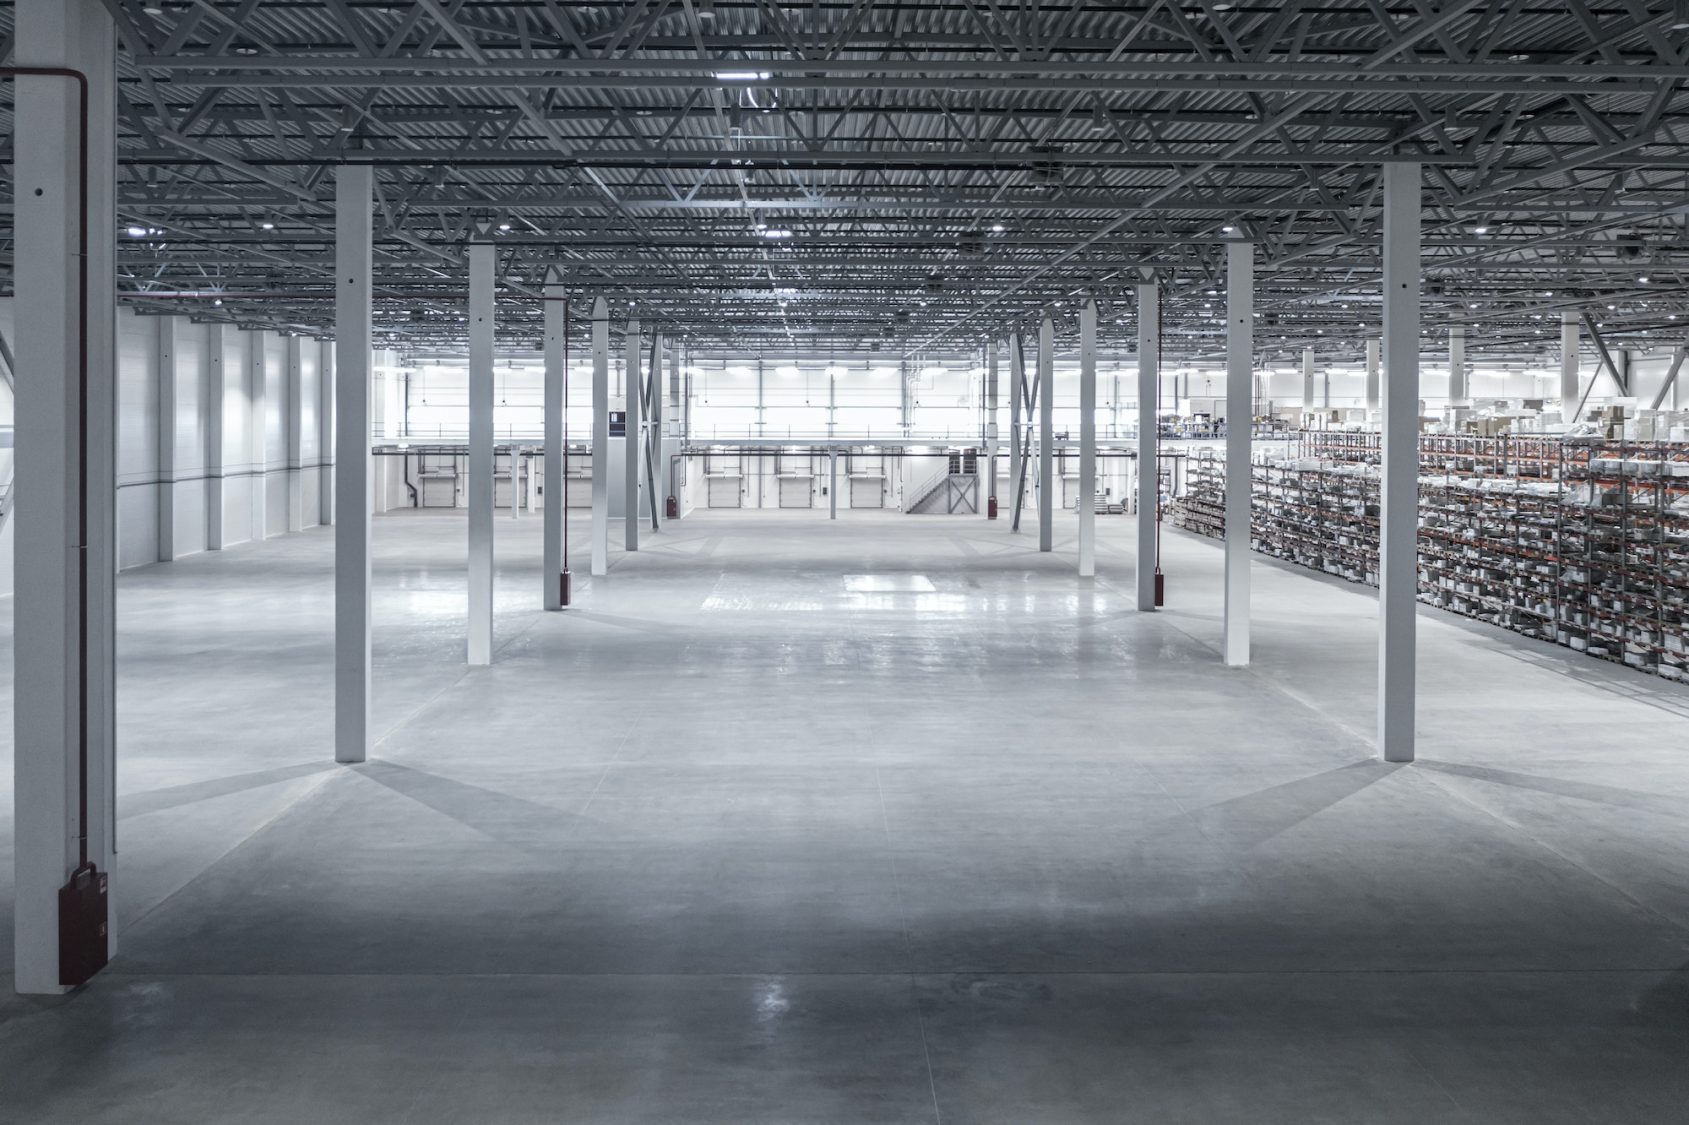 Factory or warehouse or industrial building Modern interior design with concrete floor